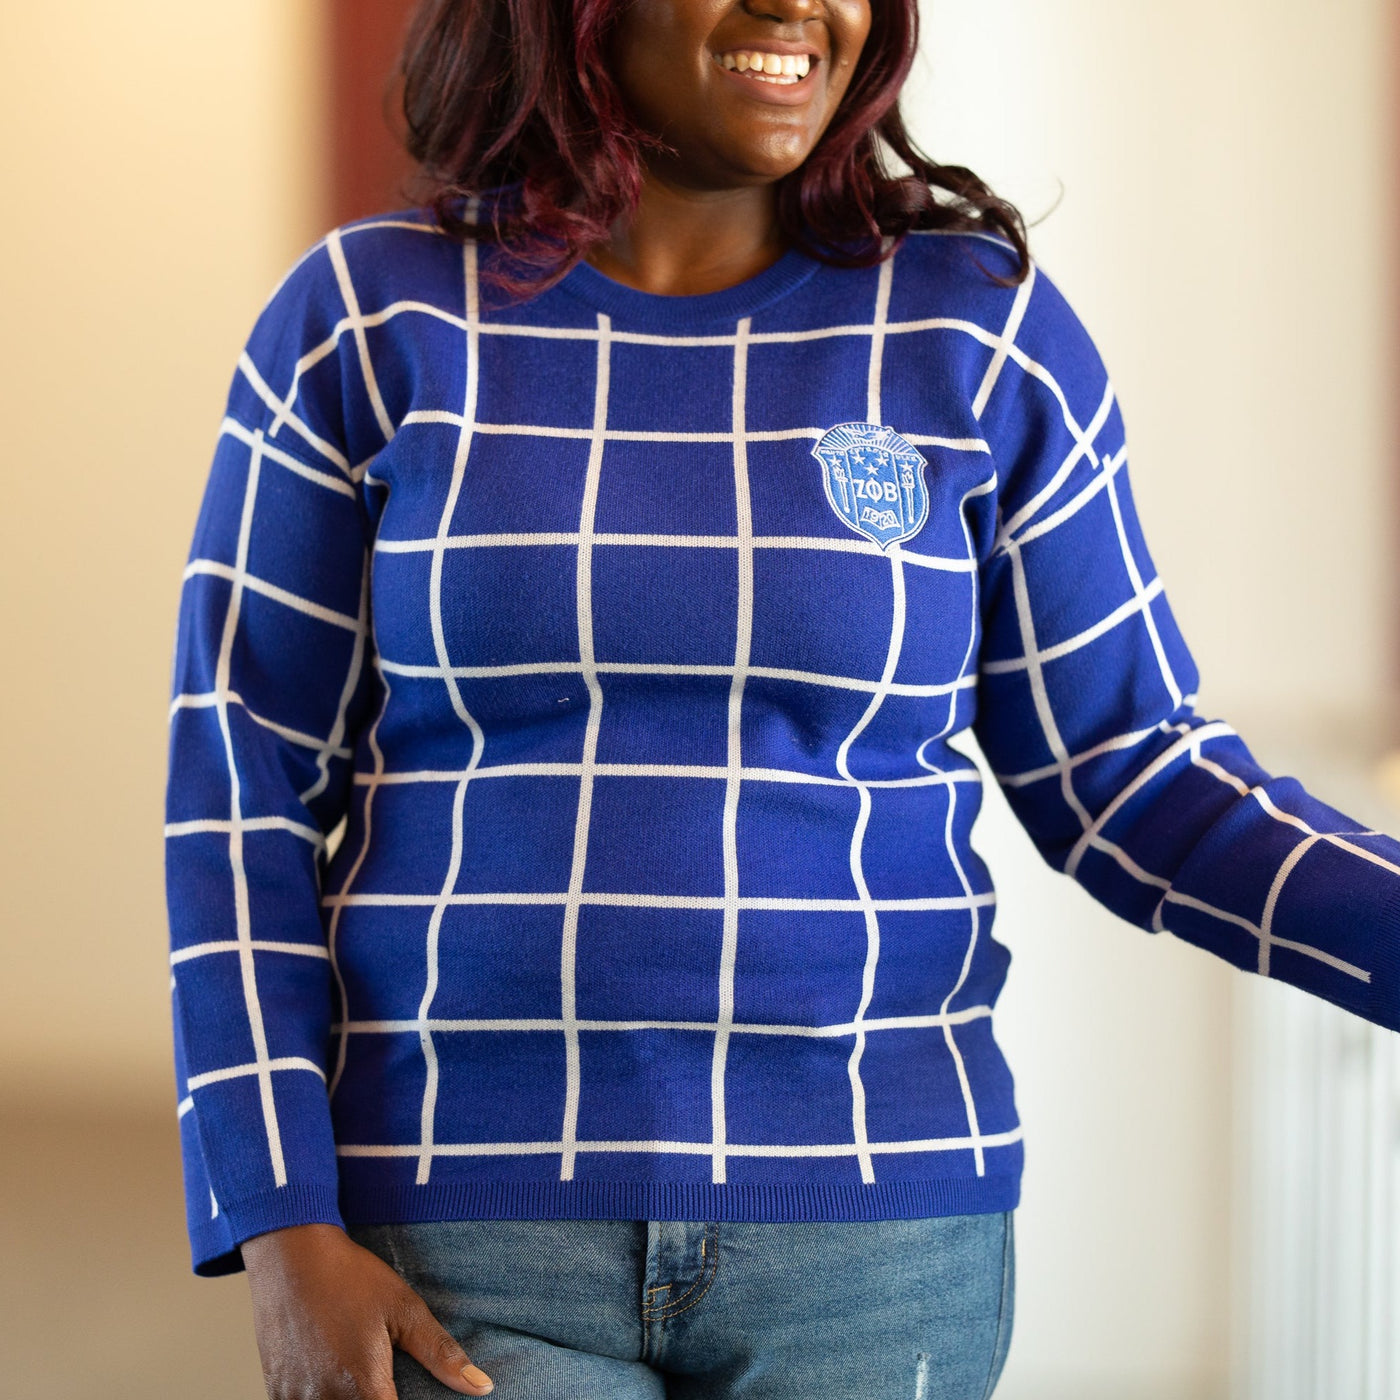 Royal Blue and White Checkered Sweater